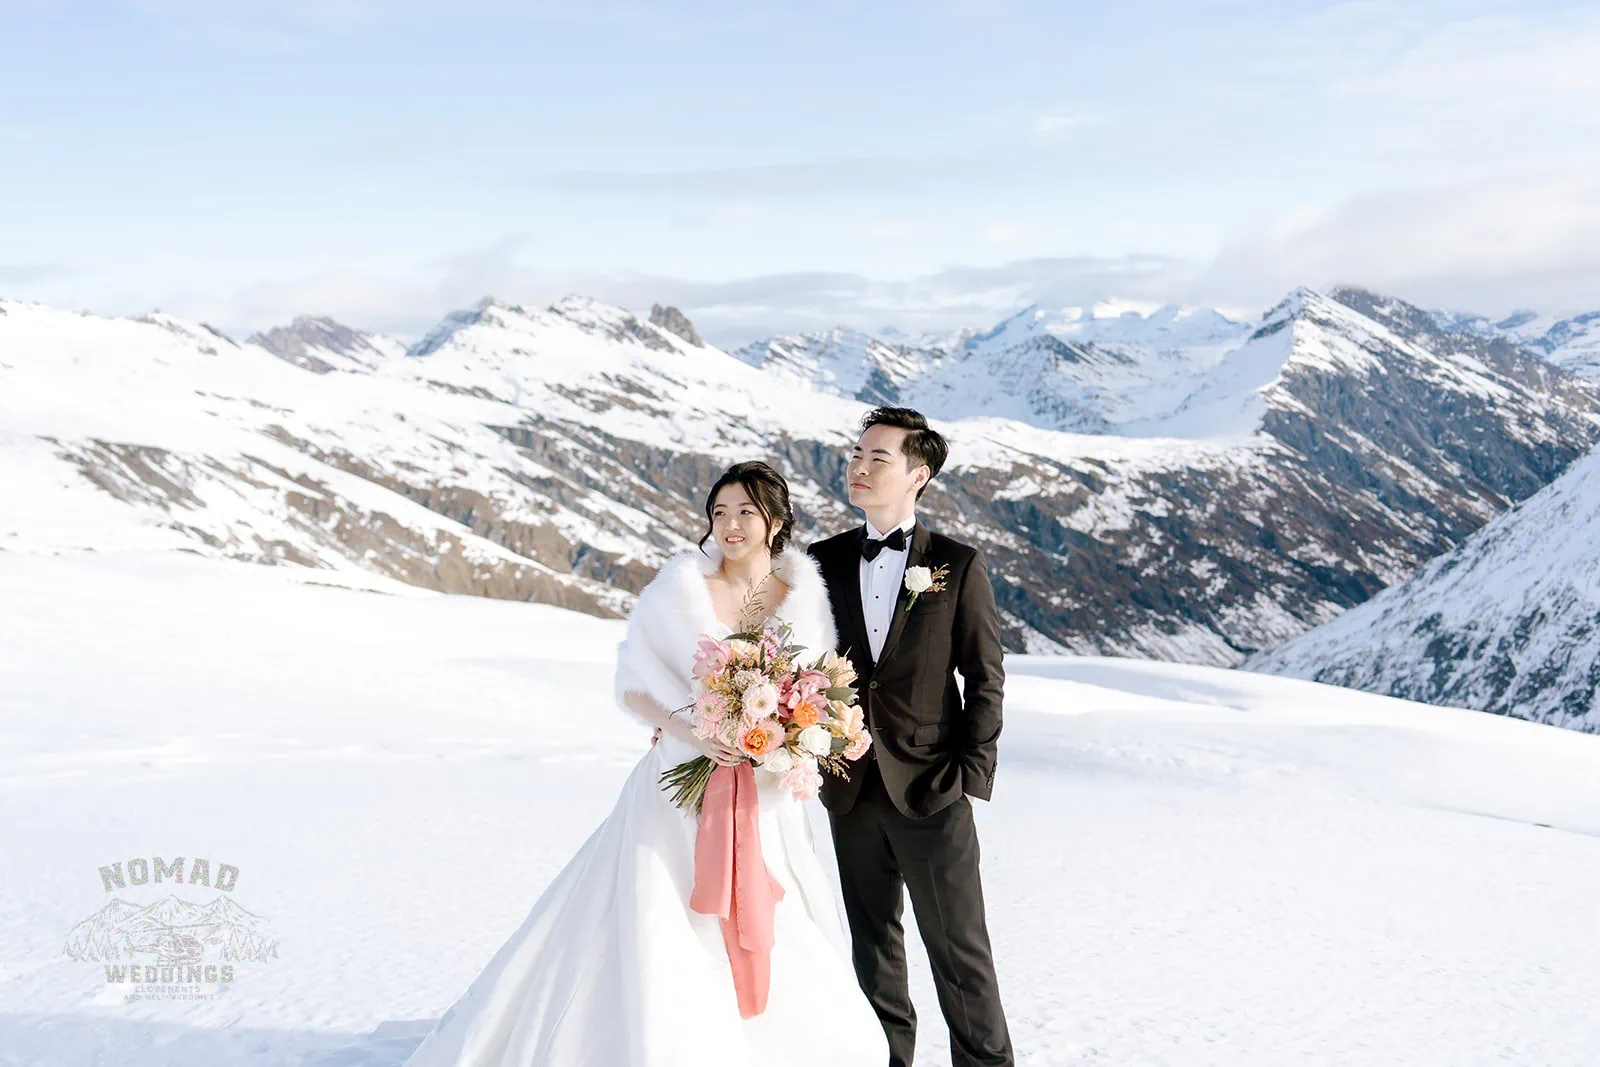 Queenstown New Zealand Elopement Wedding Photographer - Keywords: Bride and groom, snow covered mountain.